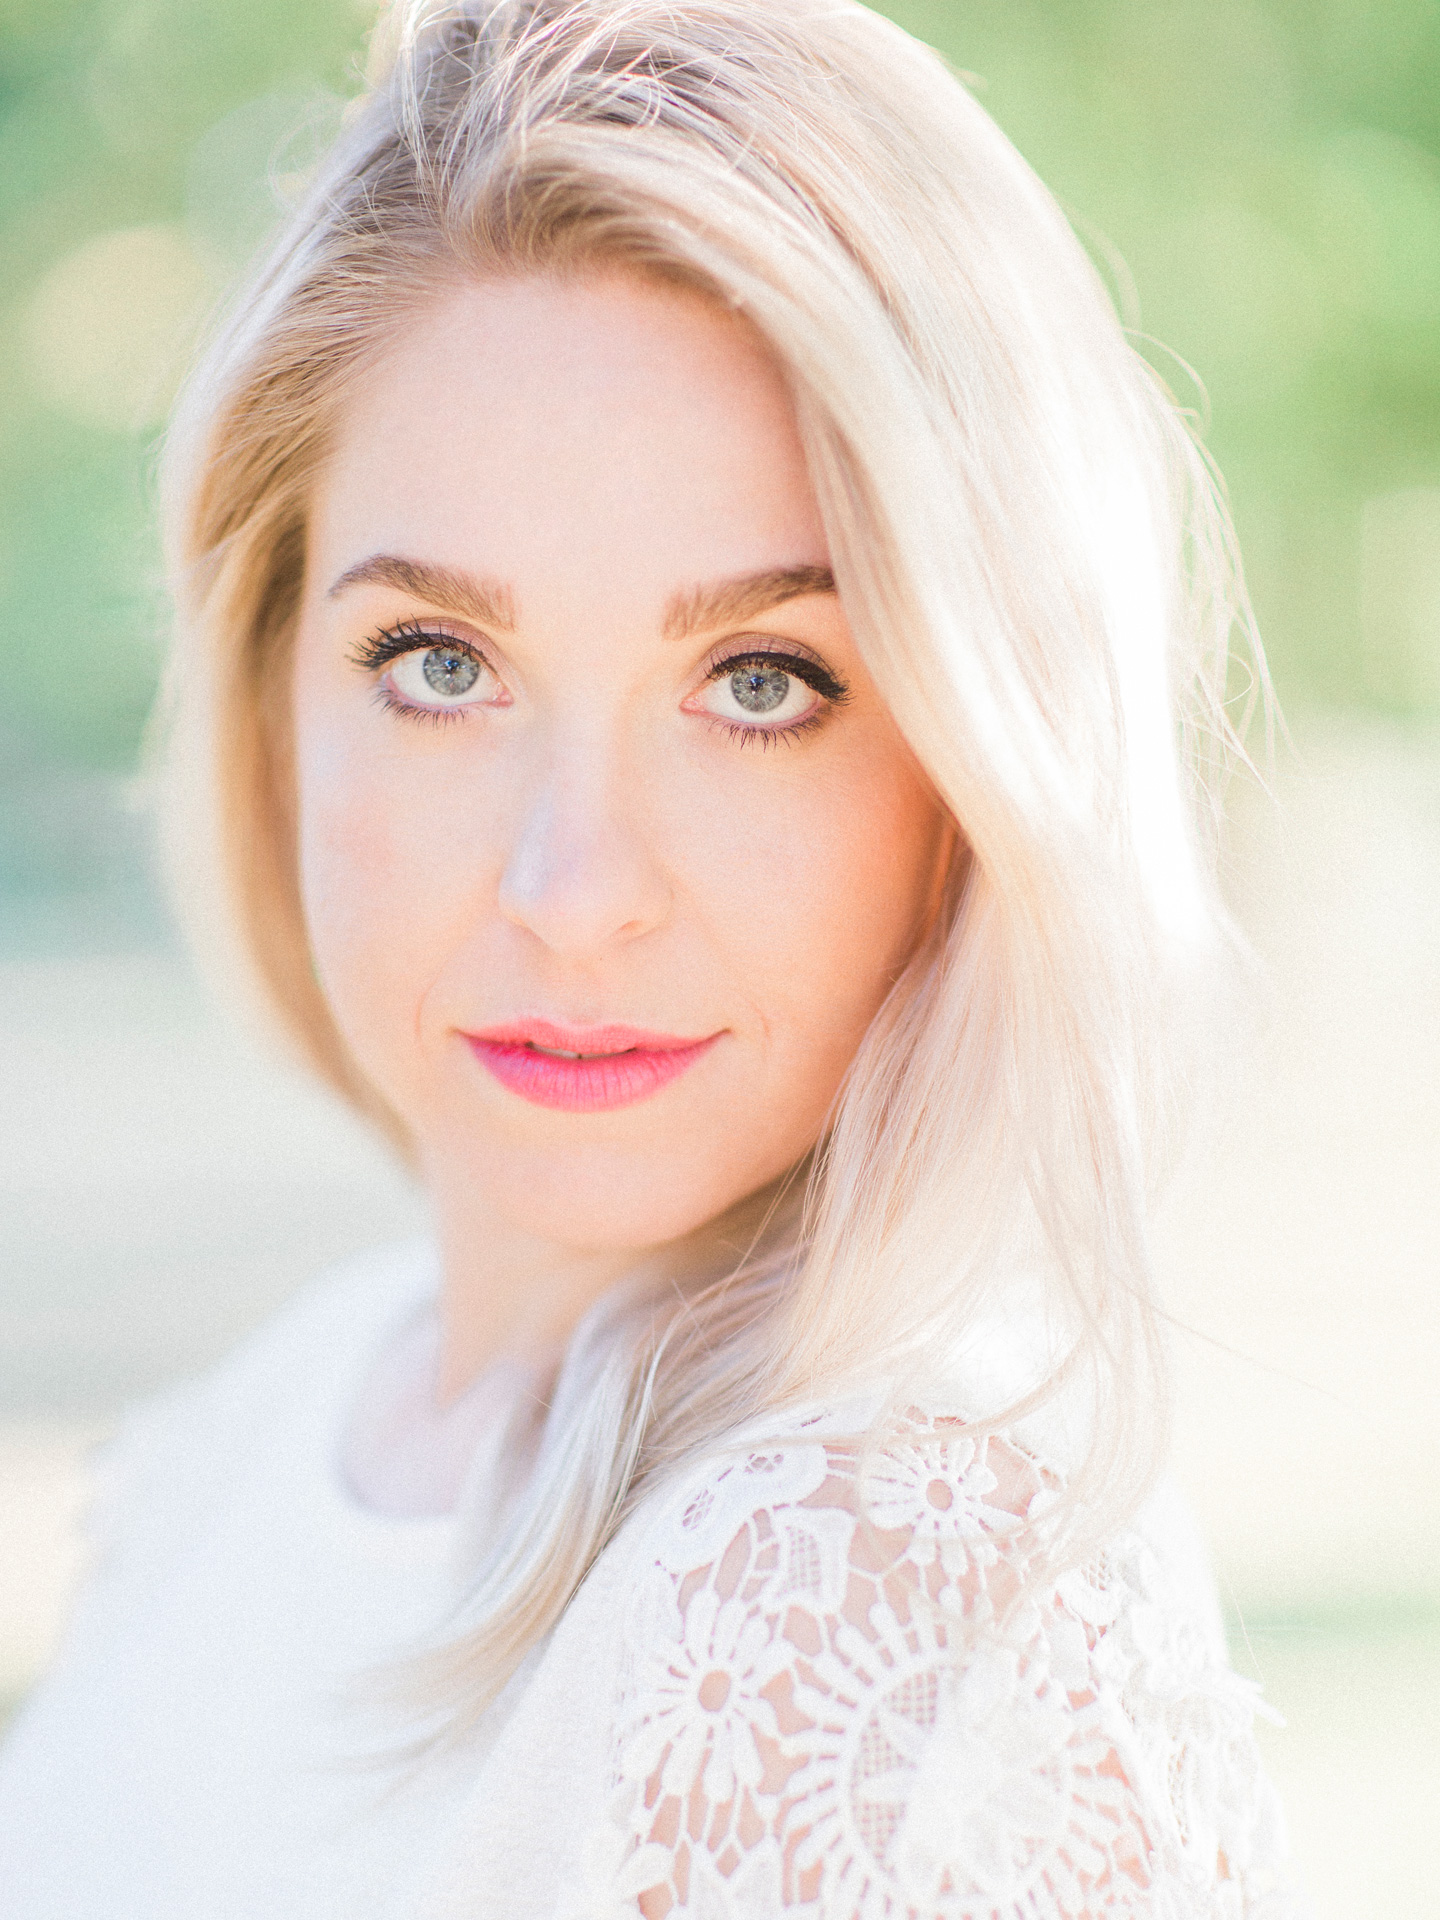 Headshot of gorgeous bride-to-be during Chicago engagement session by Love Tree Studios